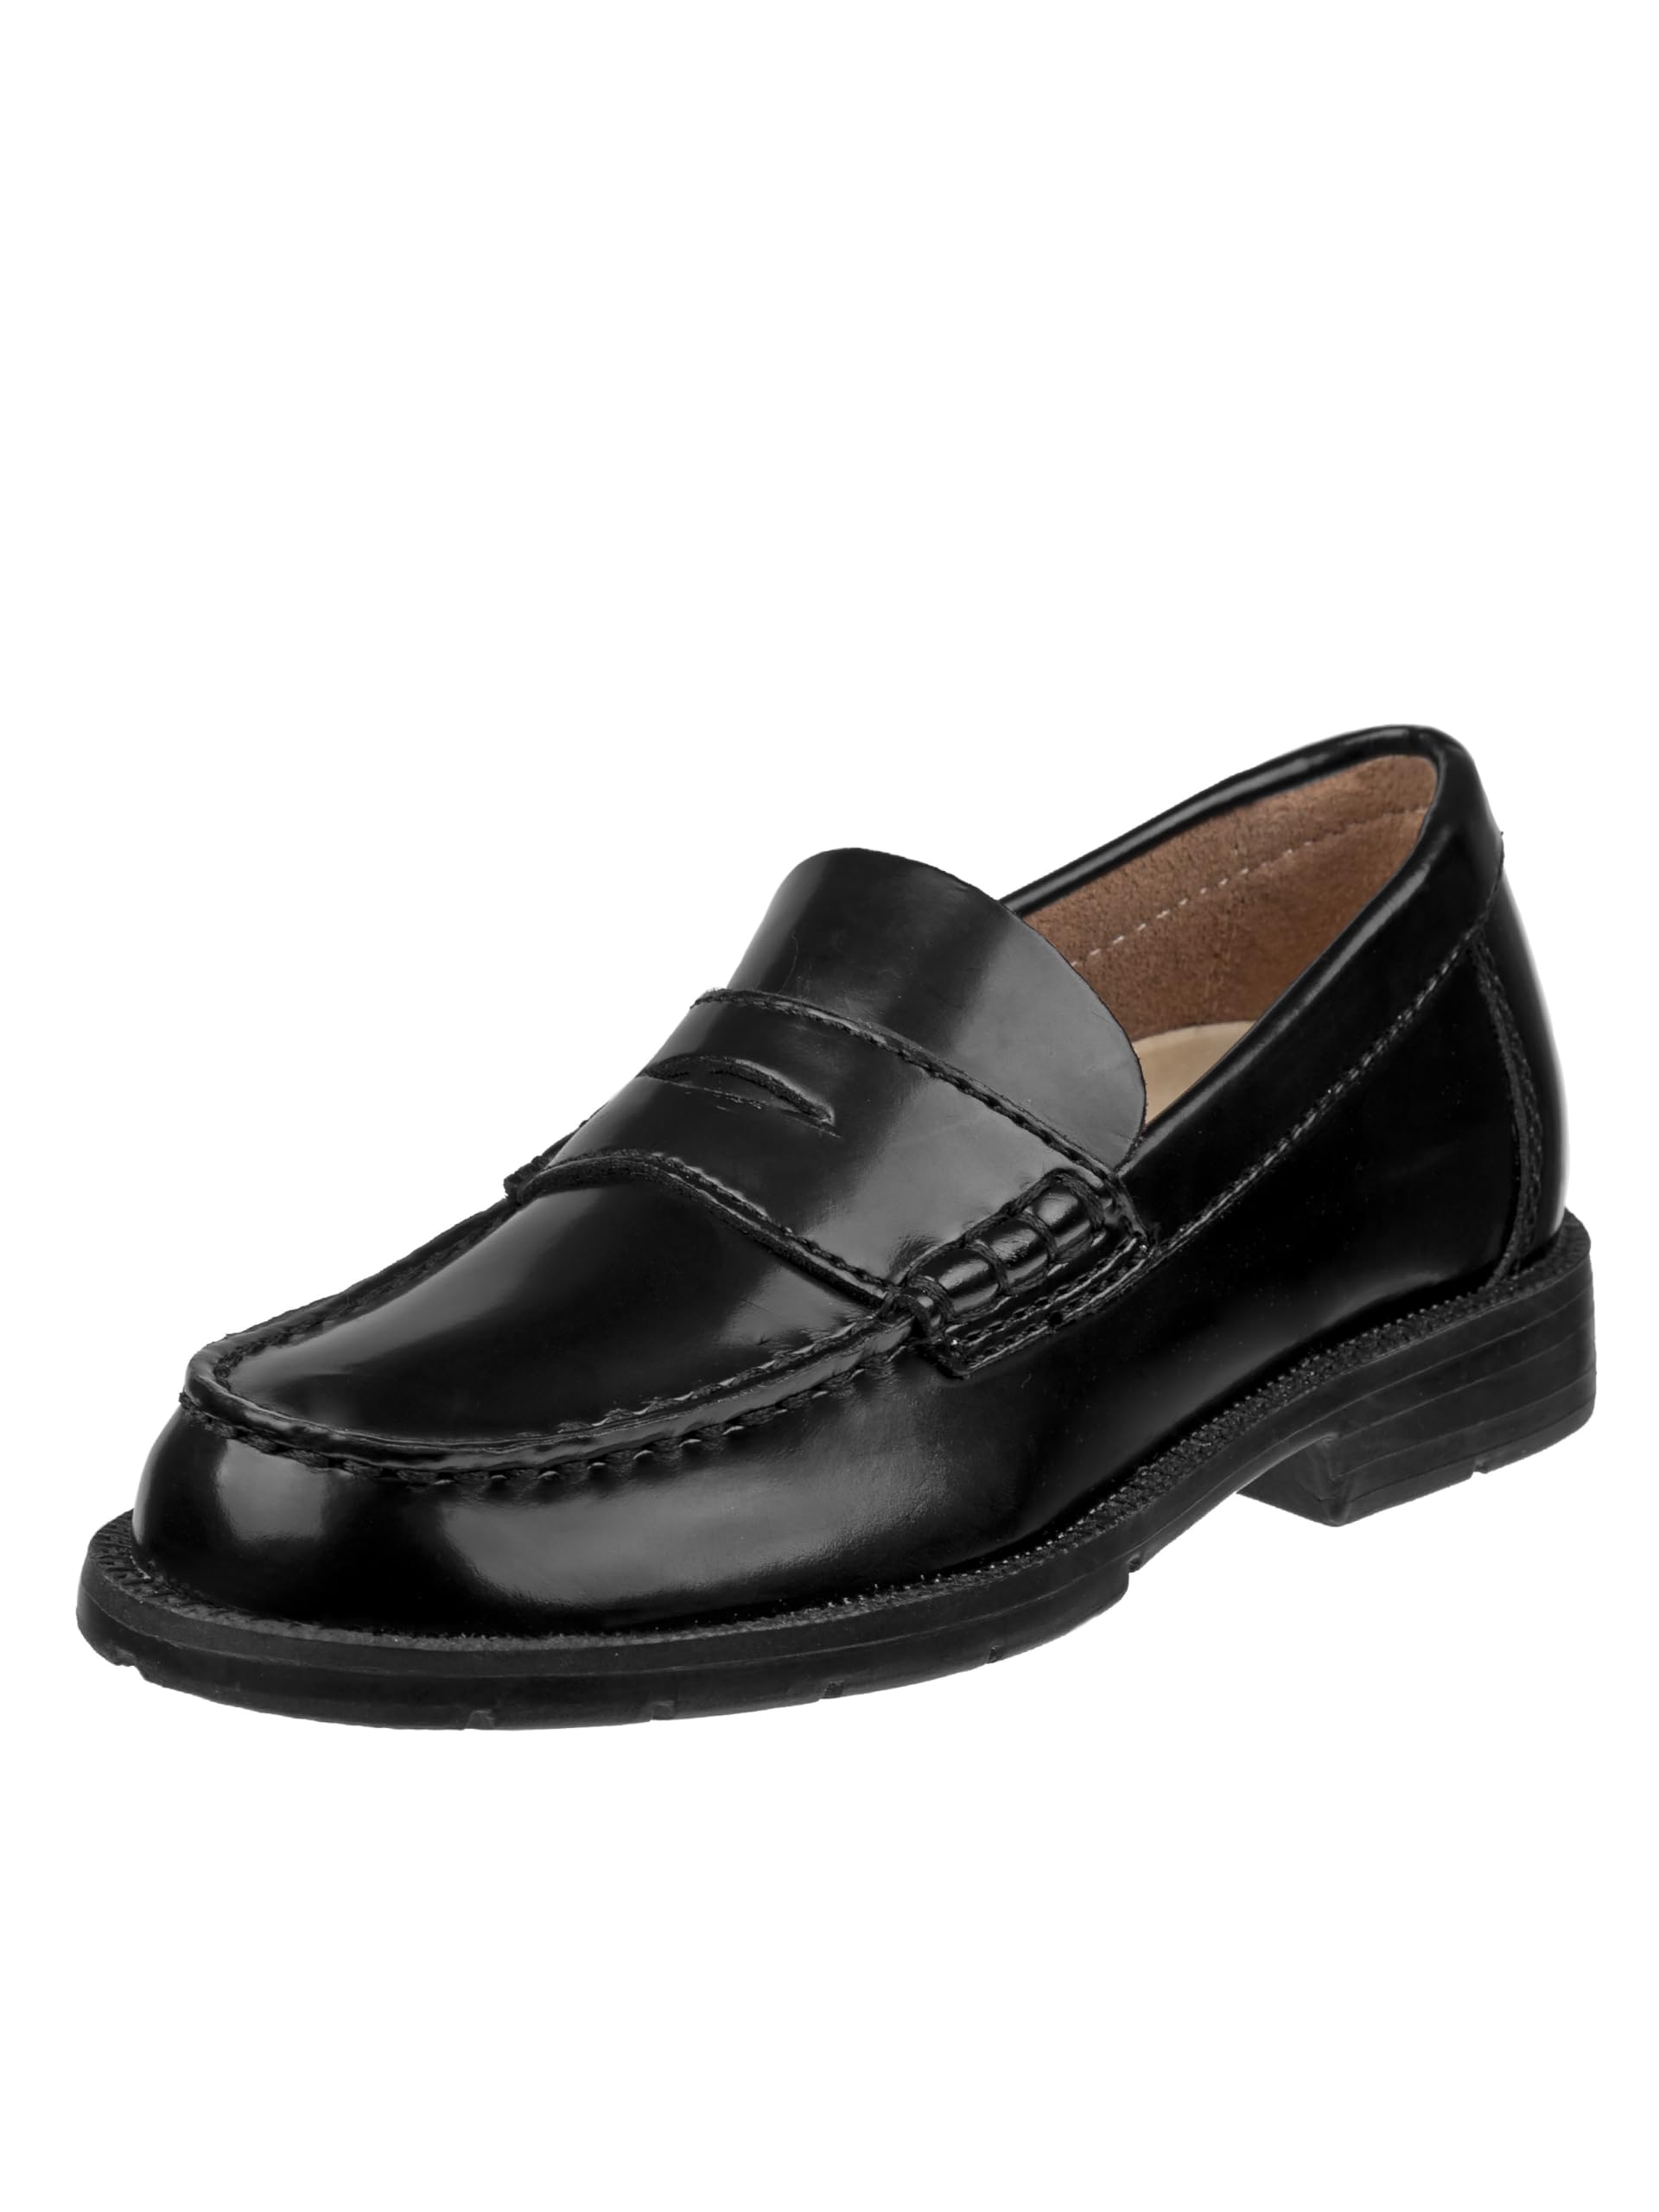 Academie Gear Men's Dress Casual Classic Penny Loafers Leather Shoes